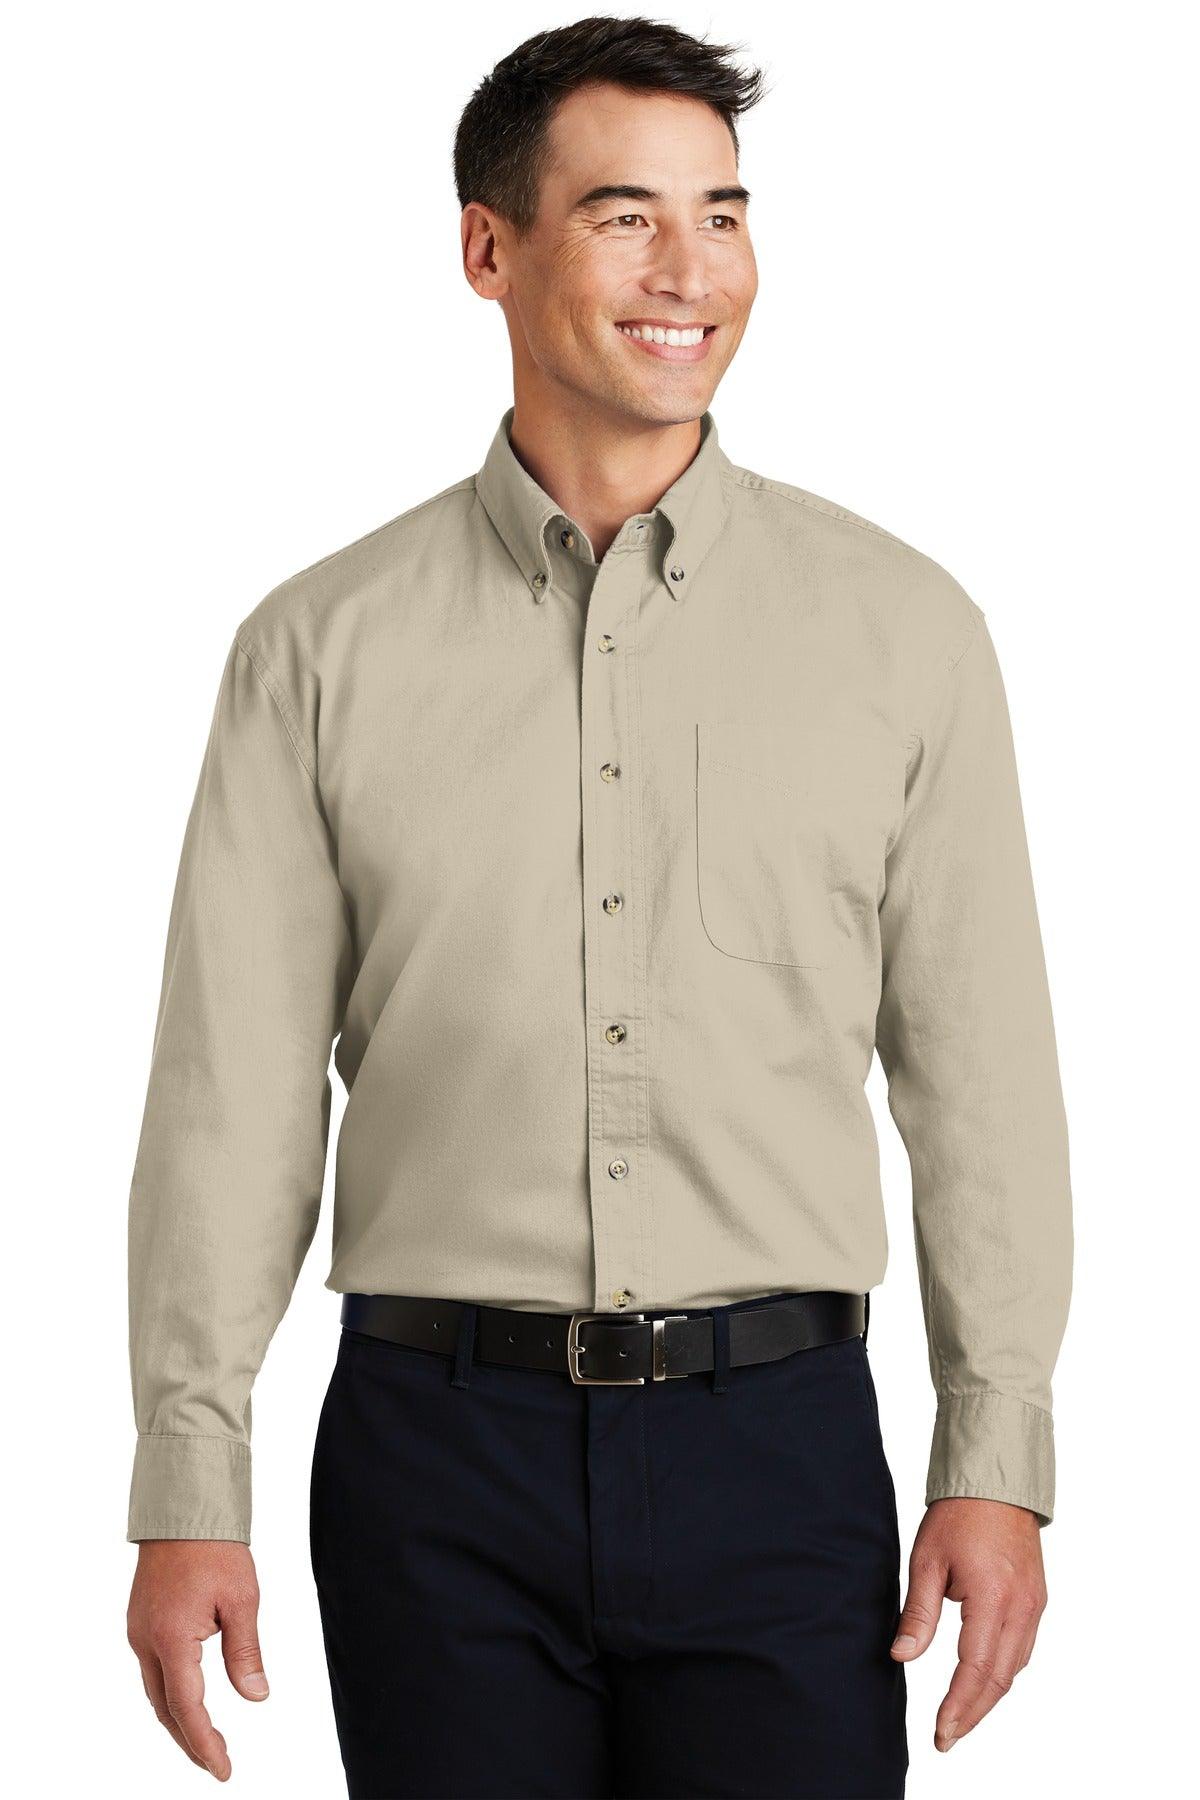 Port Authority Long Sleeve Twill Shirt. S600T - Dresses Max